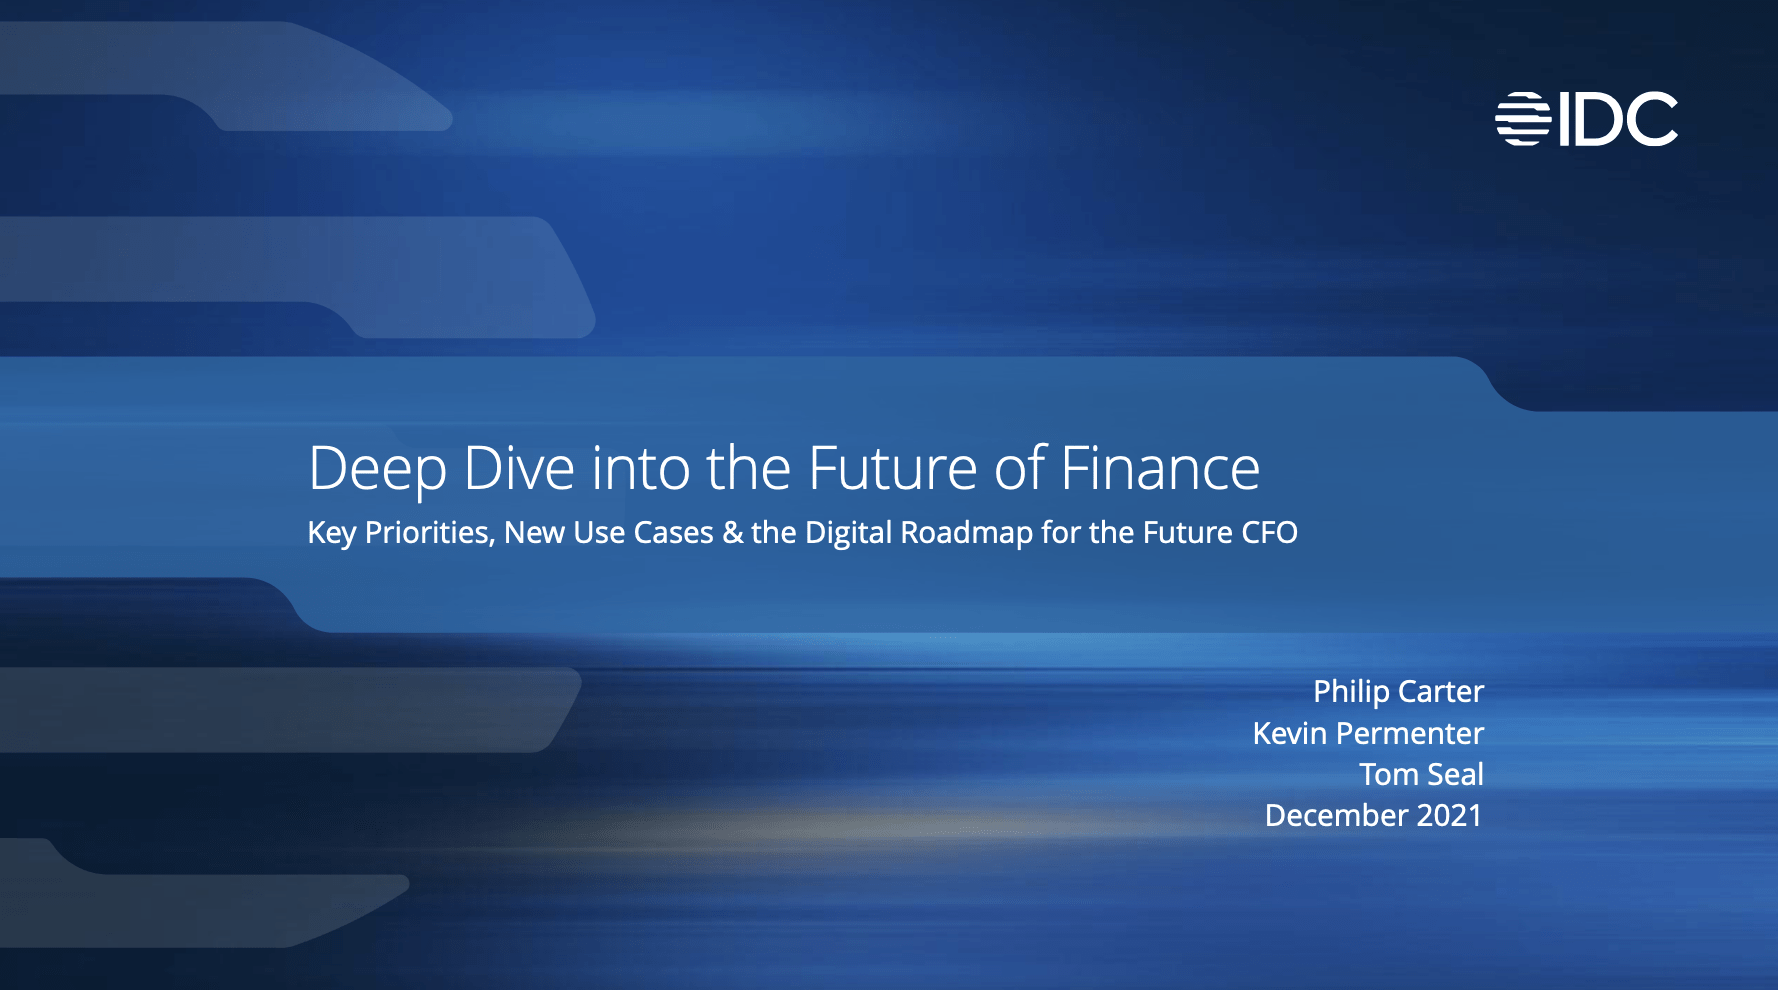 IDC Research - Alteryx & IDC Research: Deep Dive into the Future of Finance